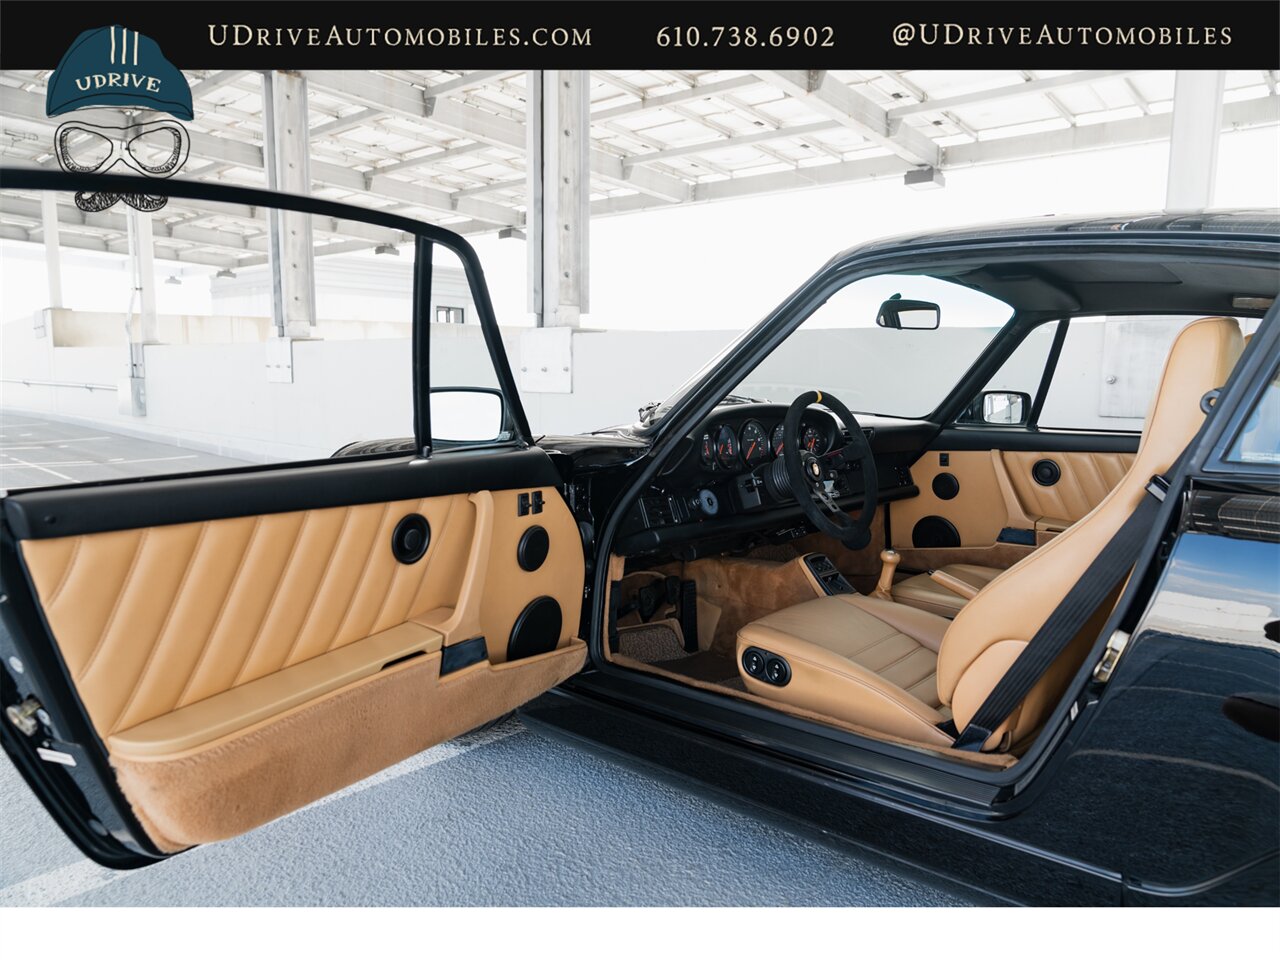 1989 Porsche 911 Carrera 4  964 C4 5 Speed Manual $63k Recent Service and Upgrades - Photo 30 - West Chester, PA 19382